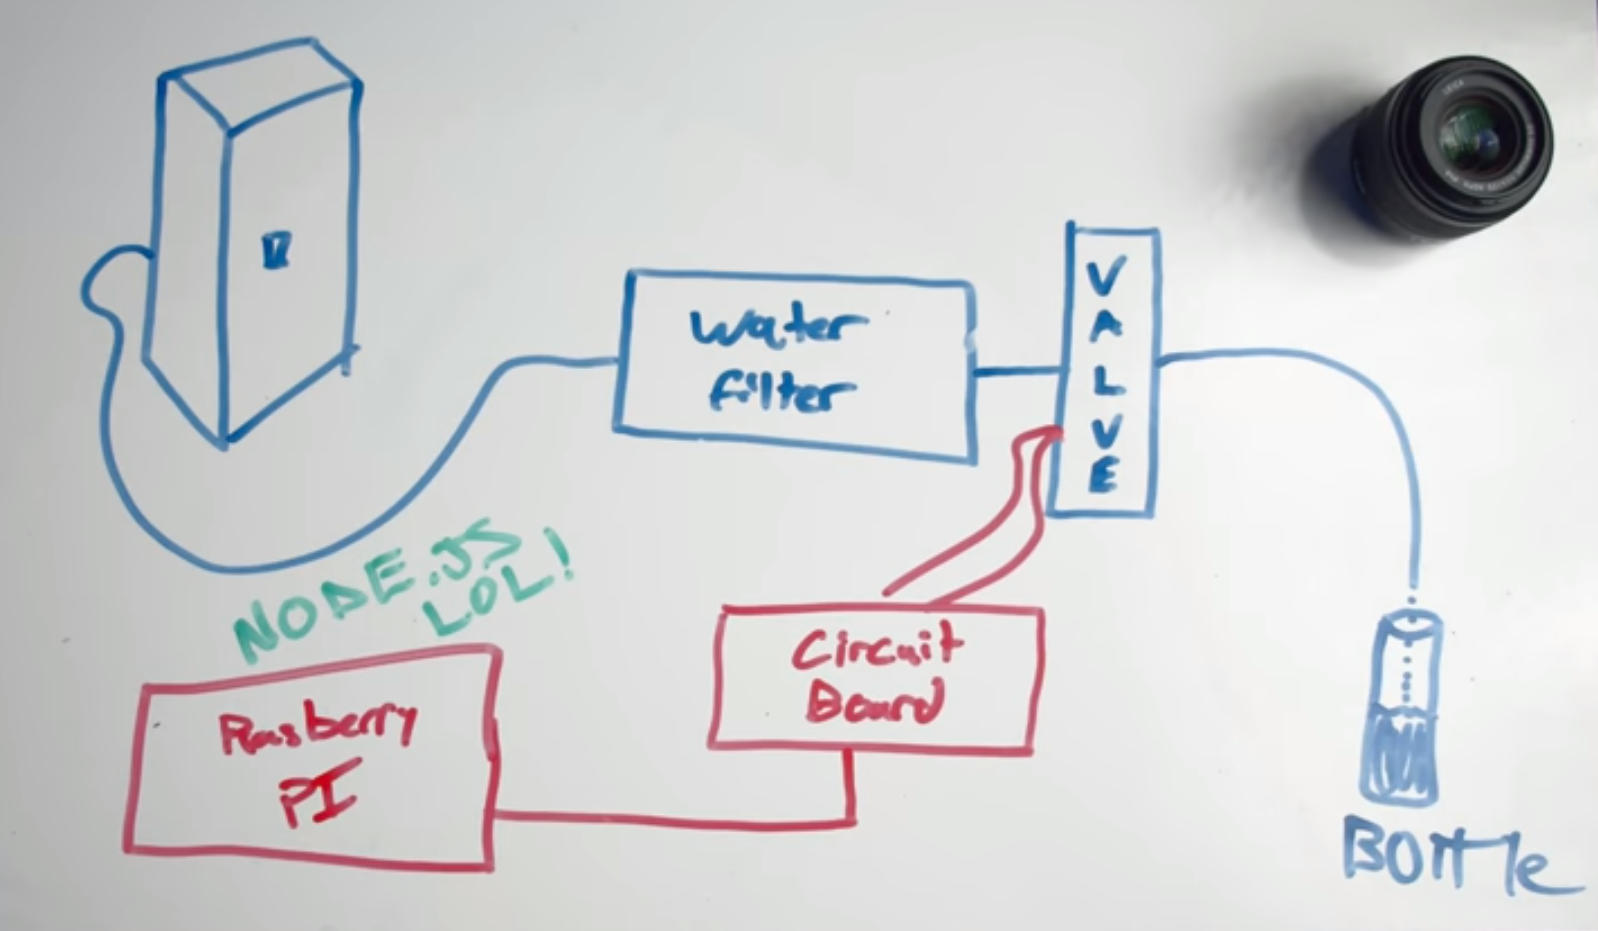 Diagram of the water bottle filler setup, hand-drawn by the maker